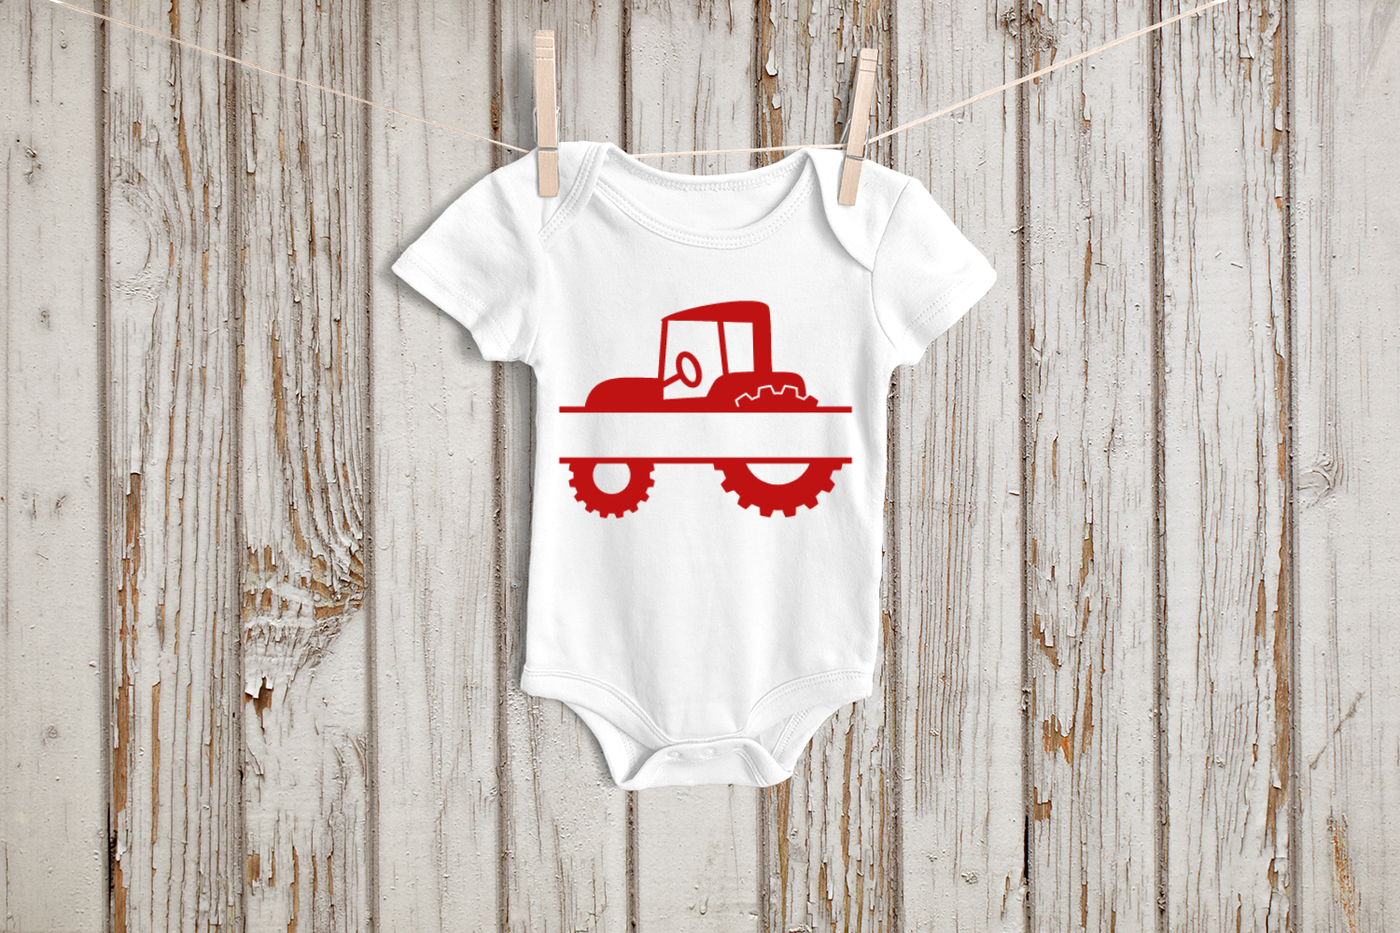 A white baby onesie hanging on a clothesline. On it is a tractor design split in the middle.